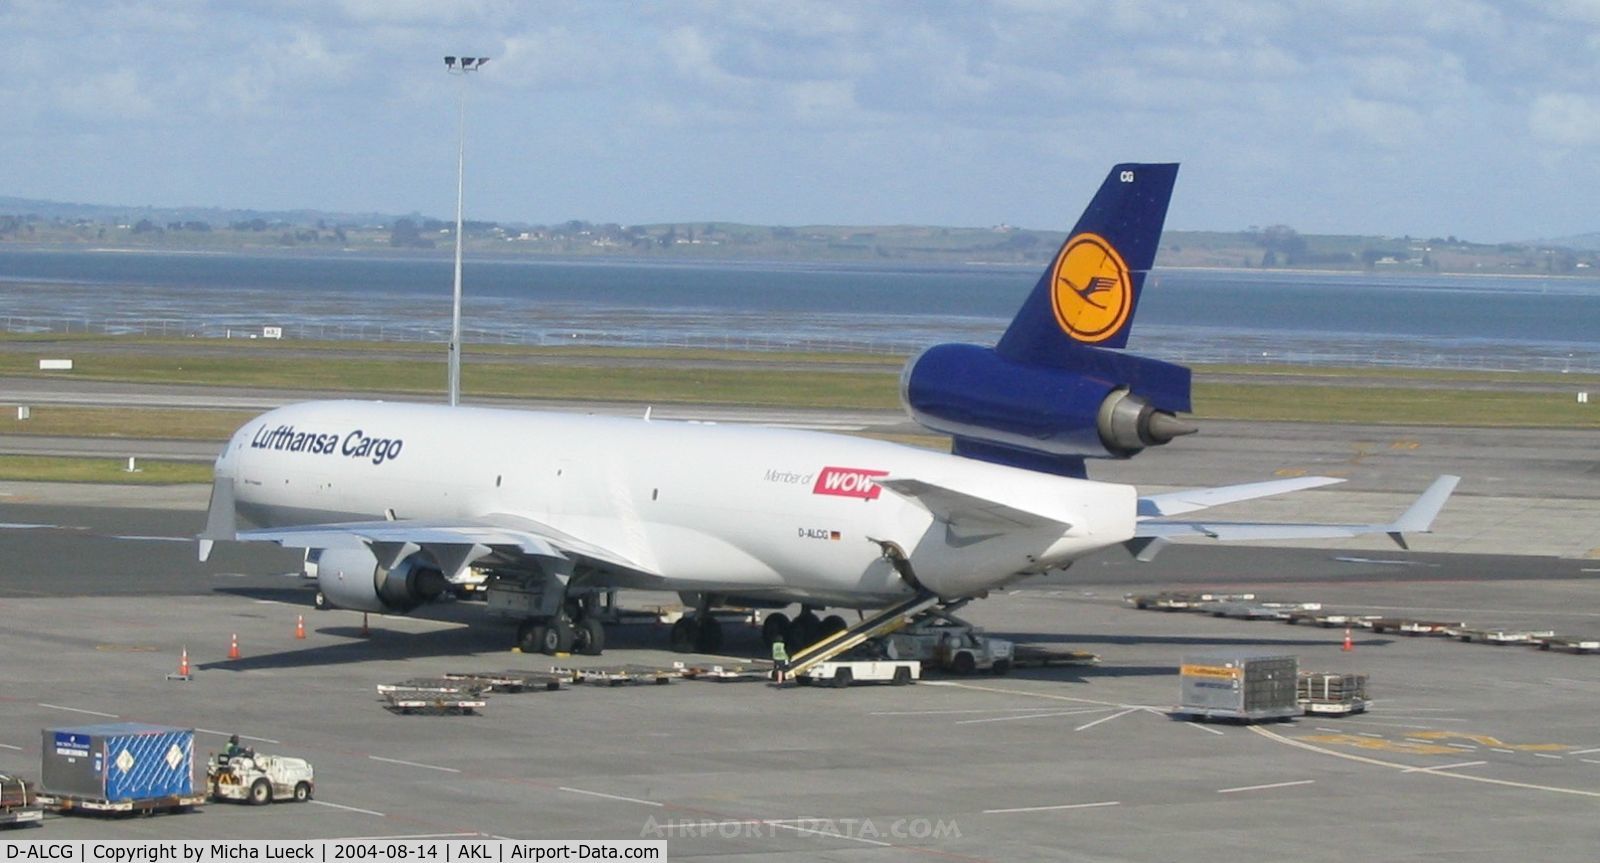 D-ALCG, 1999 McDonnell Douglas MD-11F C/N 48799, On the round-the-world cargo run